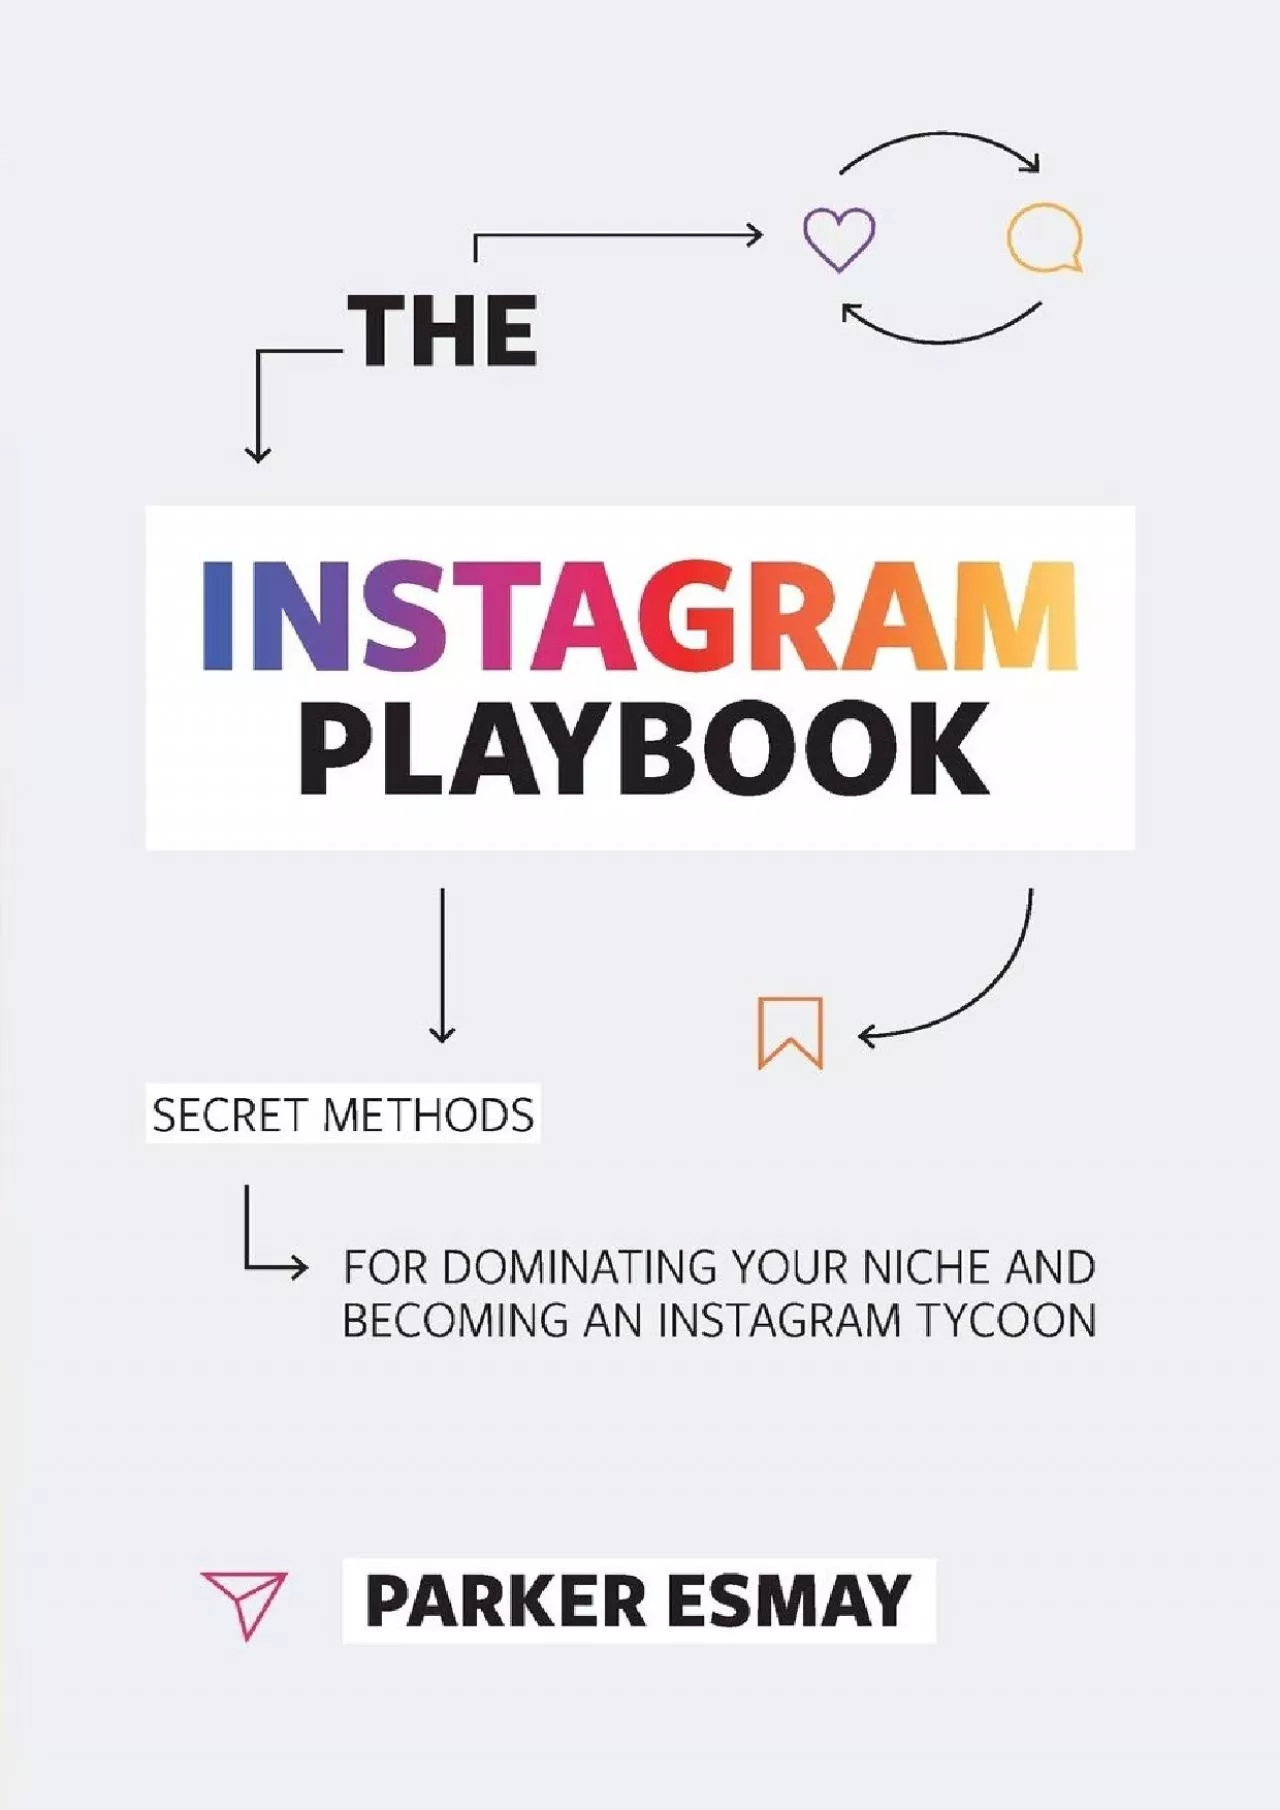 The Instagram Playbook: Secret Methods for Dominating Your Niche and Becoming an Instagram